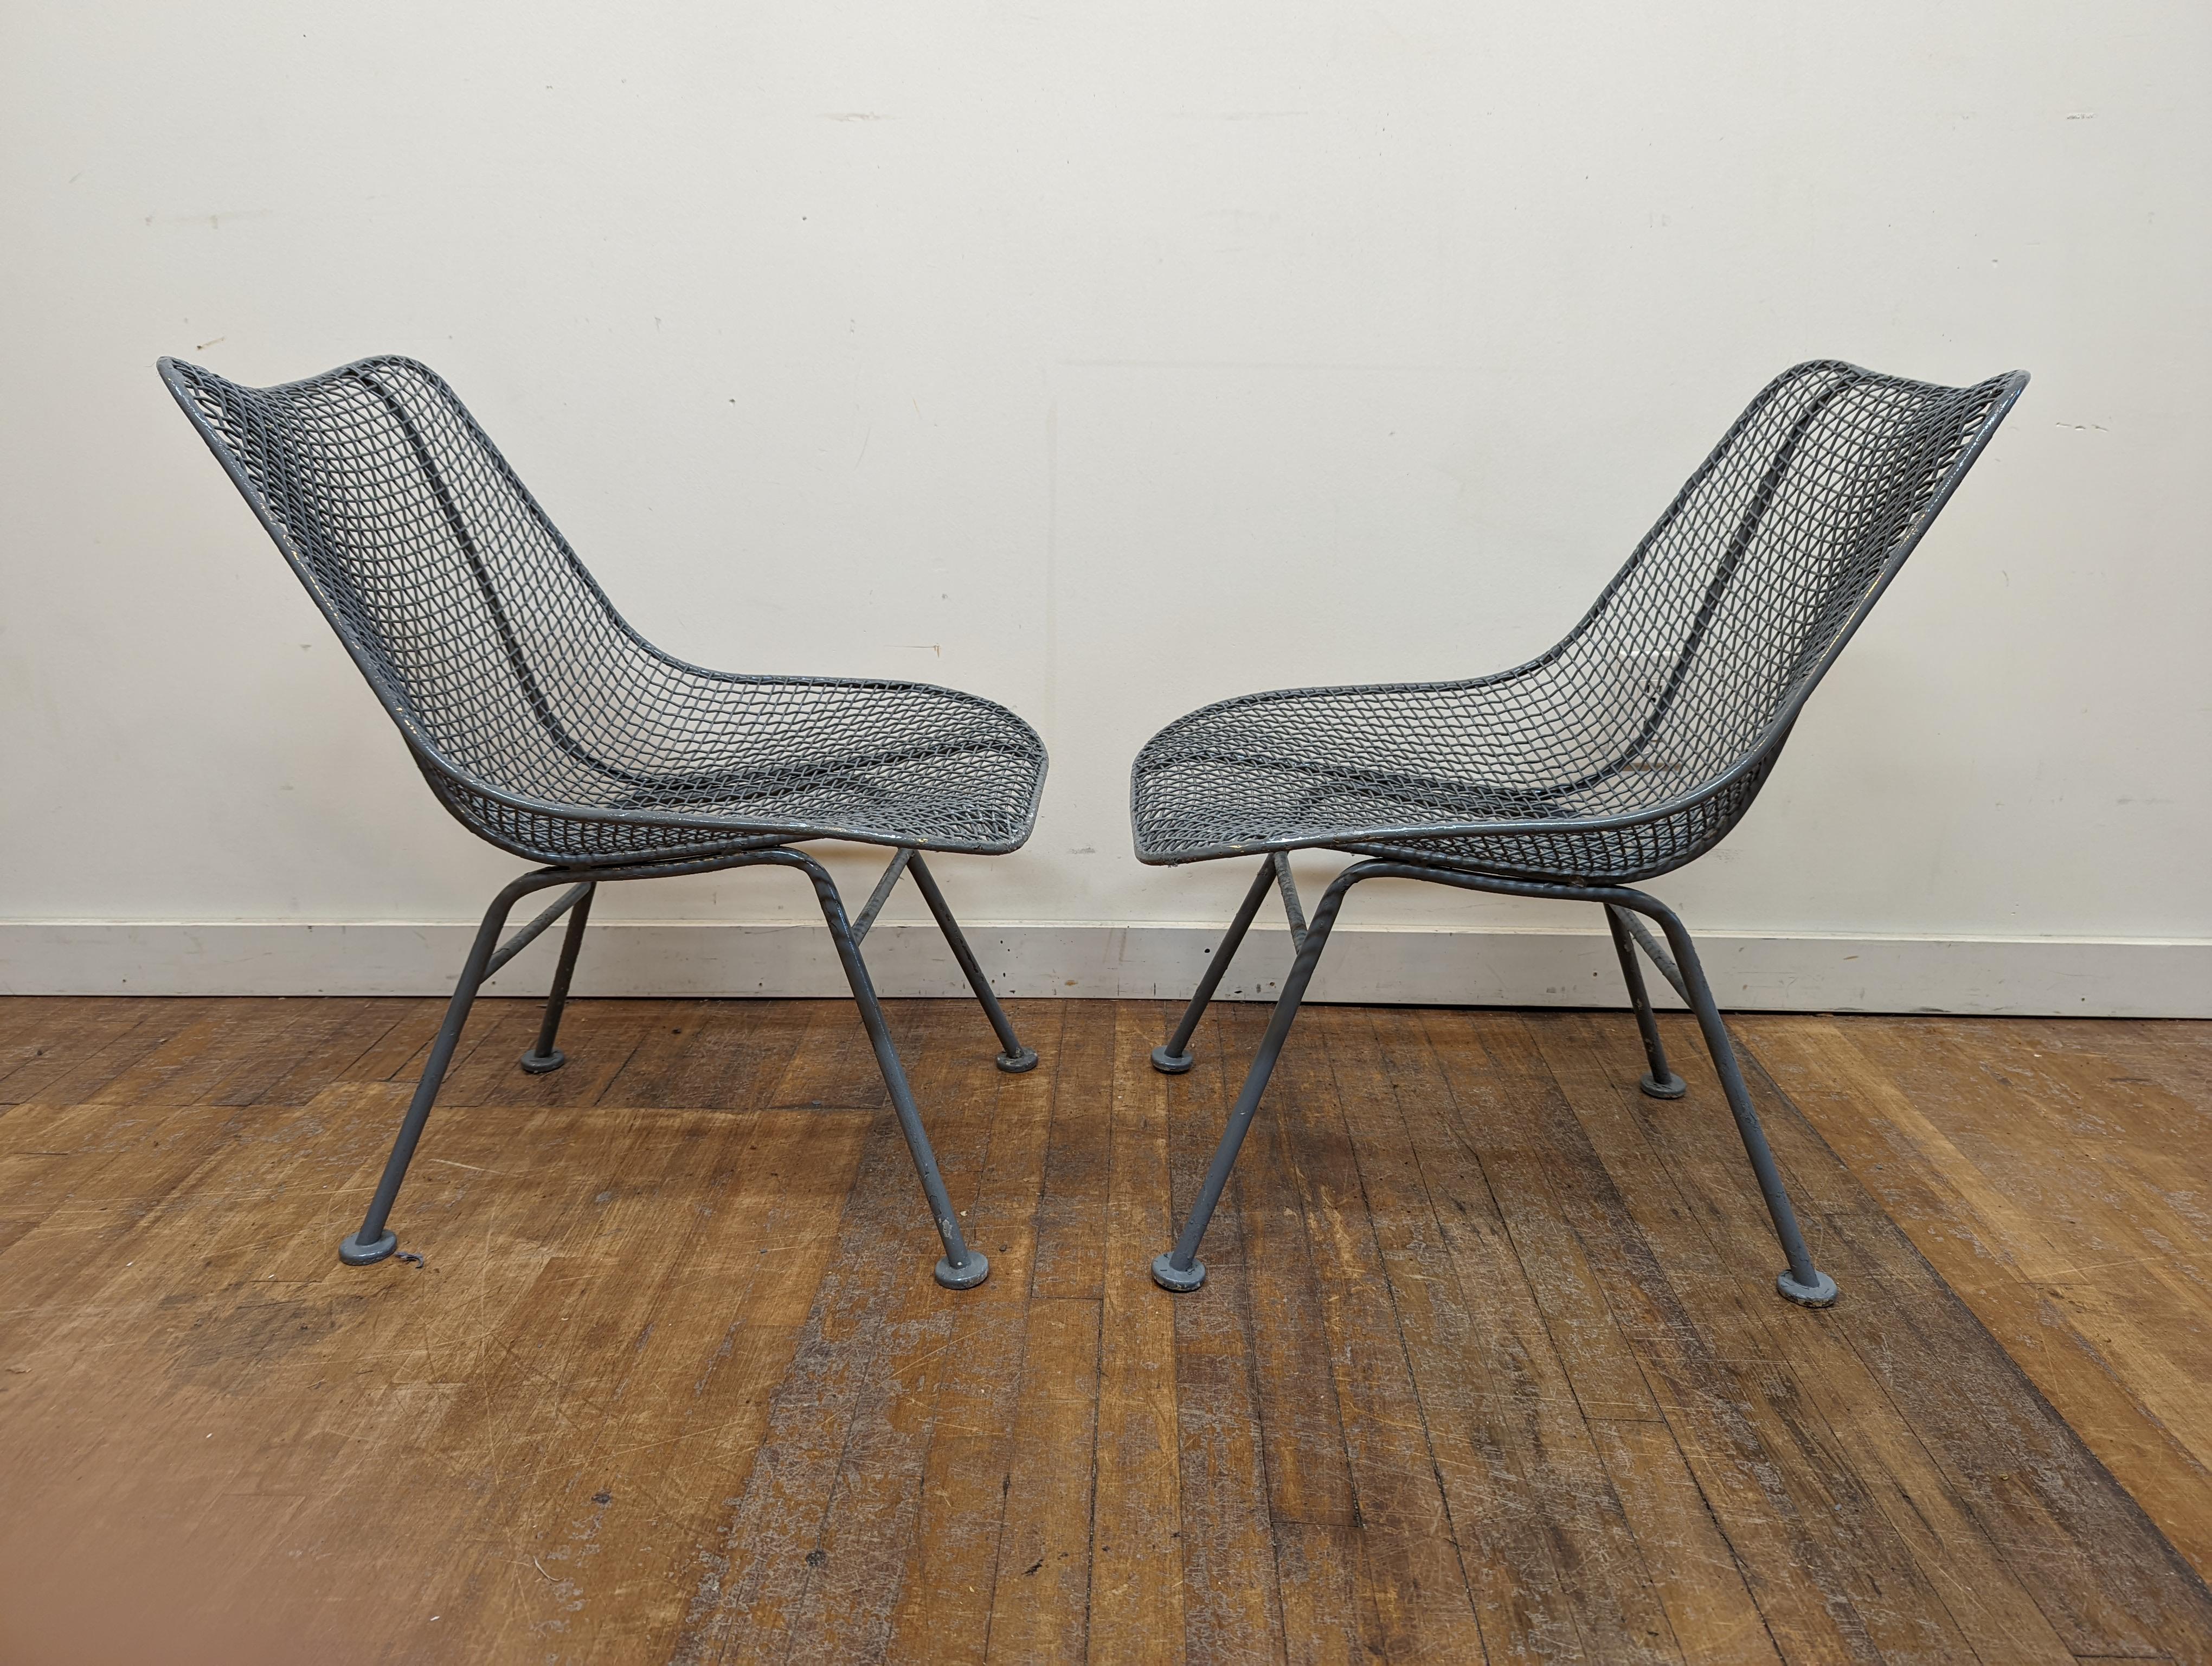 Pair of sculptura chairs by Russell Woodard. Iron mess on frame patio chairs designed for outdoor use but many use them inside. Painted gray by previous owner. In good condition. Classic Mid-Century Modern.